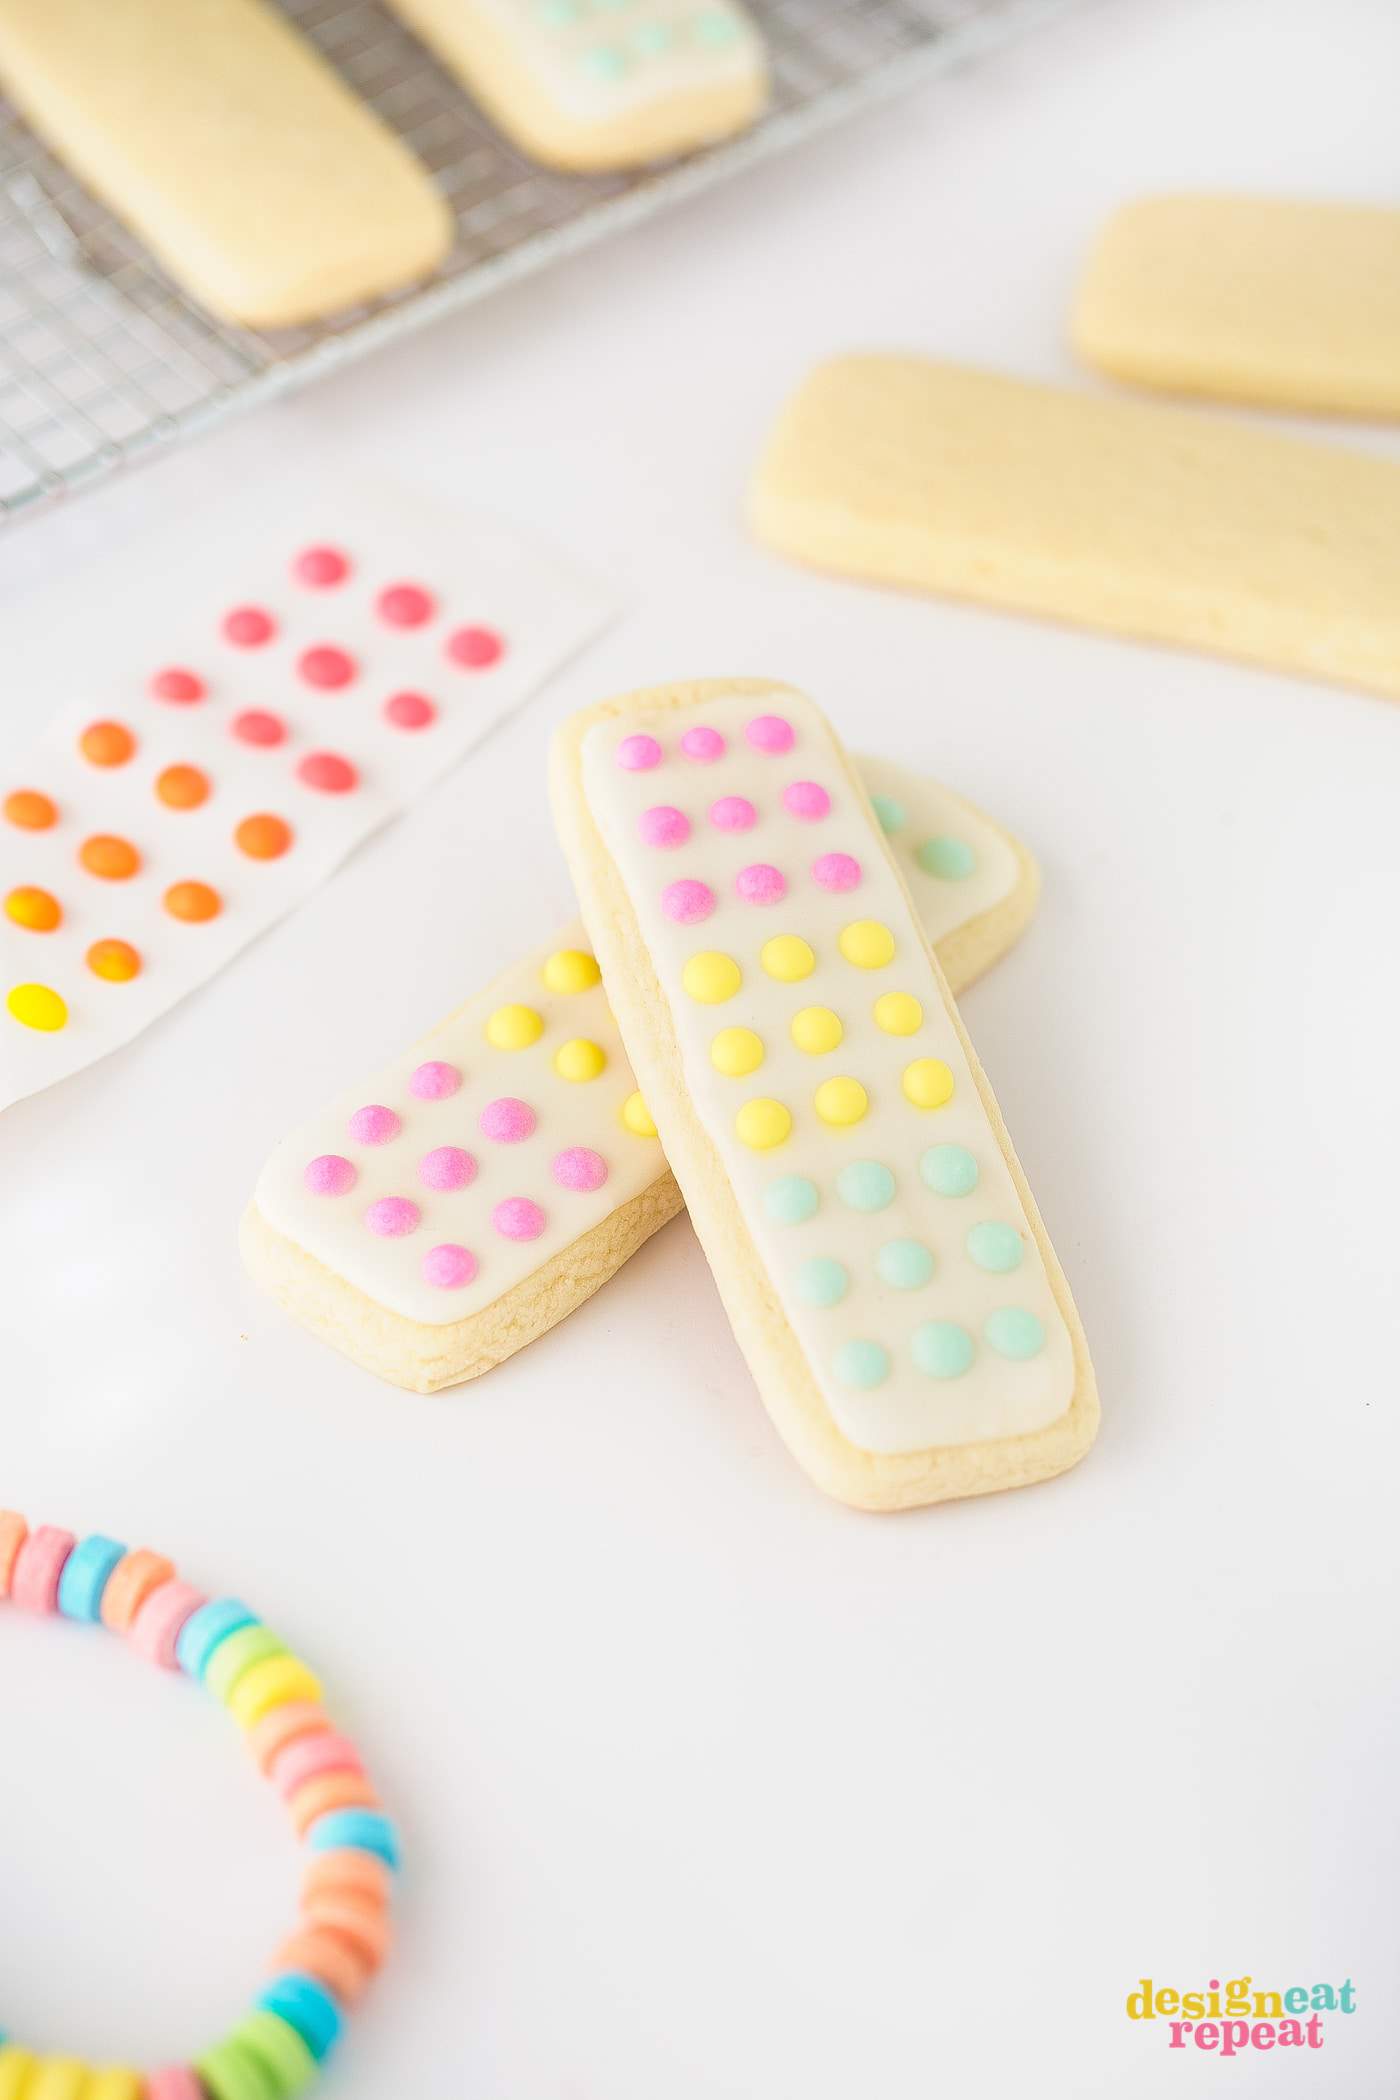 Anyone remember those vintage candy buttons?! Now you can make replicas that actually taste good by turning them into cookie form! Perfect for birthday party cookies, Halloween treats, or just an easy candy party idea!